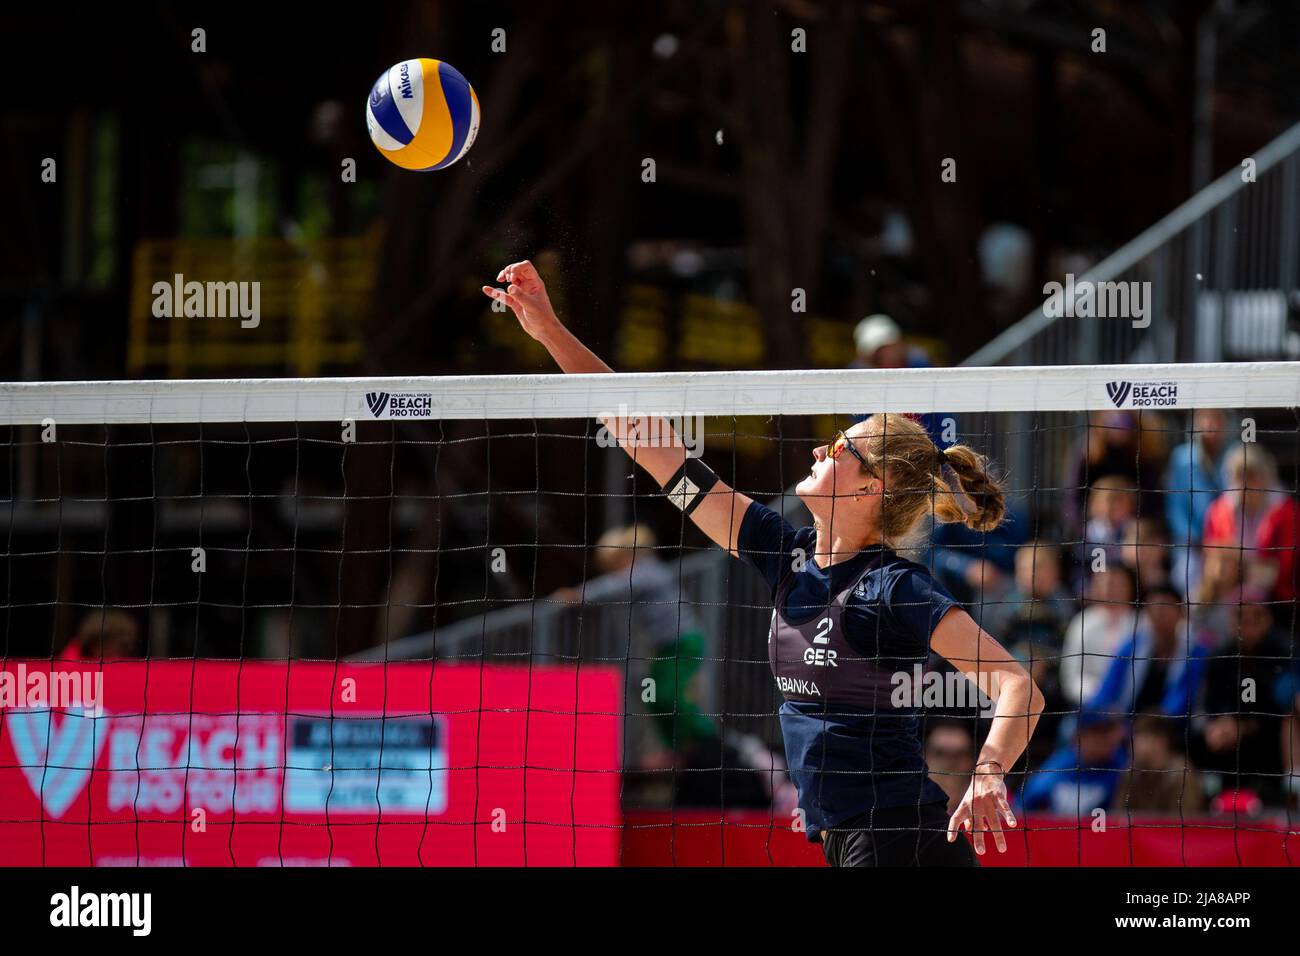 Ostrava, Czech Republic. 28th May, 2022. Cinja Tillmann of Germany in action during the Pro Tour beach volleyball tournament of Elite category semifinals match in Ostrava, Czech Republic, May 28, 2022. Credit: Vladimir Prycek/CTK Photo/Alamy Live News Stock Photo